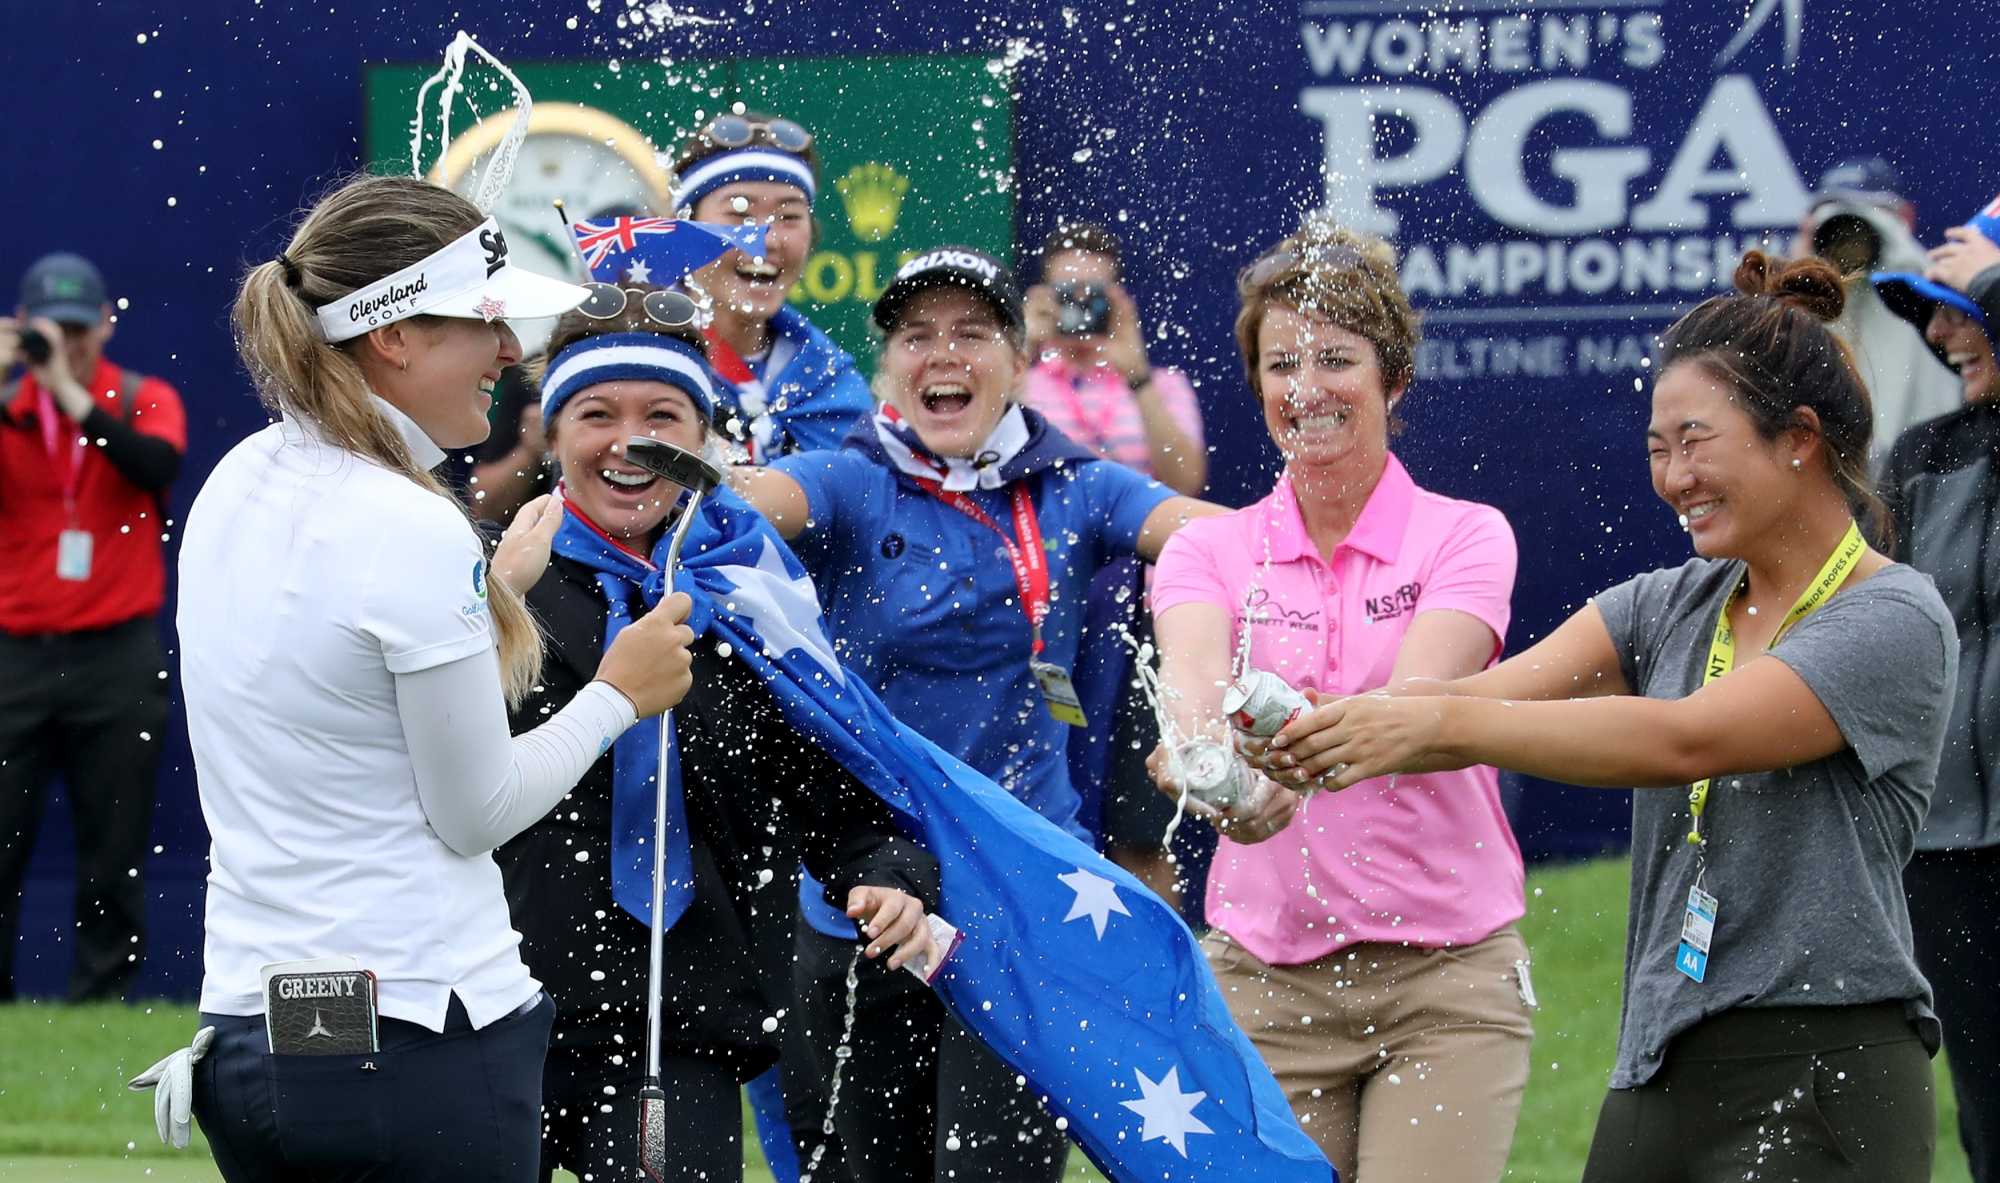 Hannah Green celebrating after her breakthrough major win. Picture: Getty